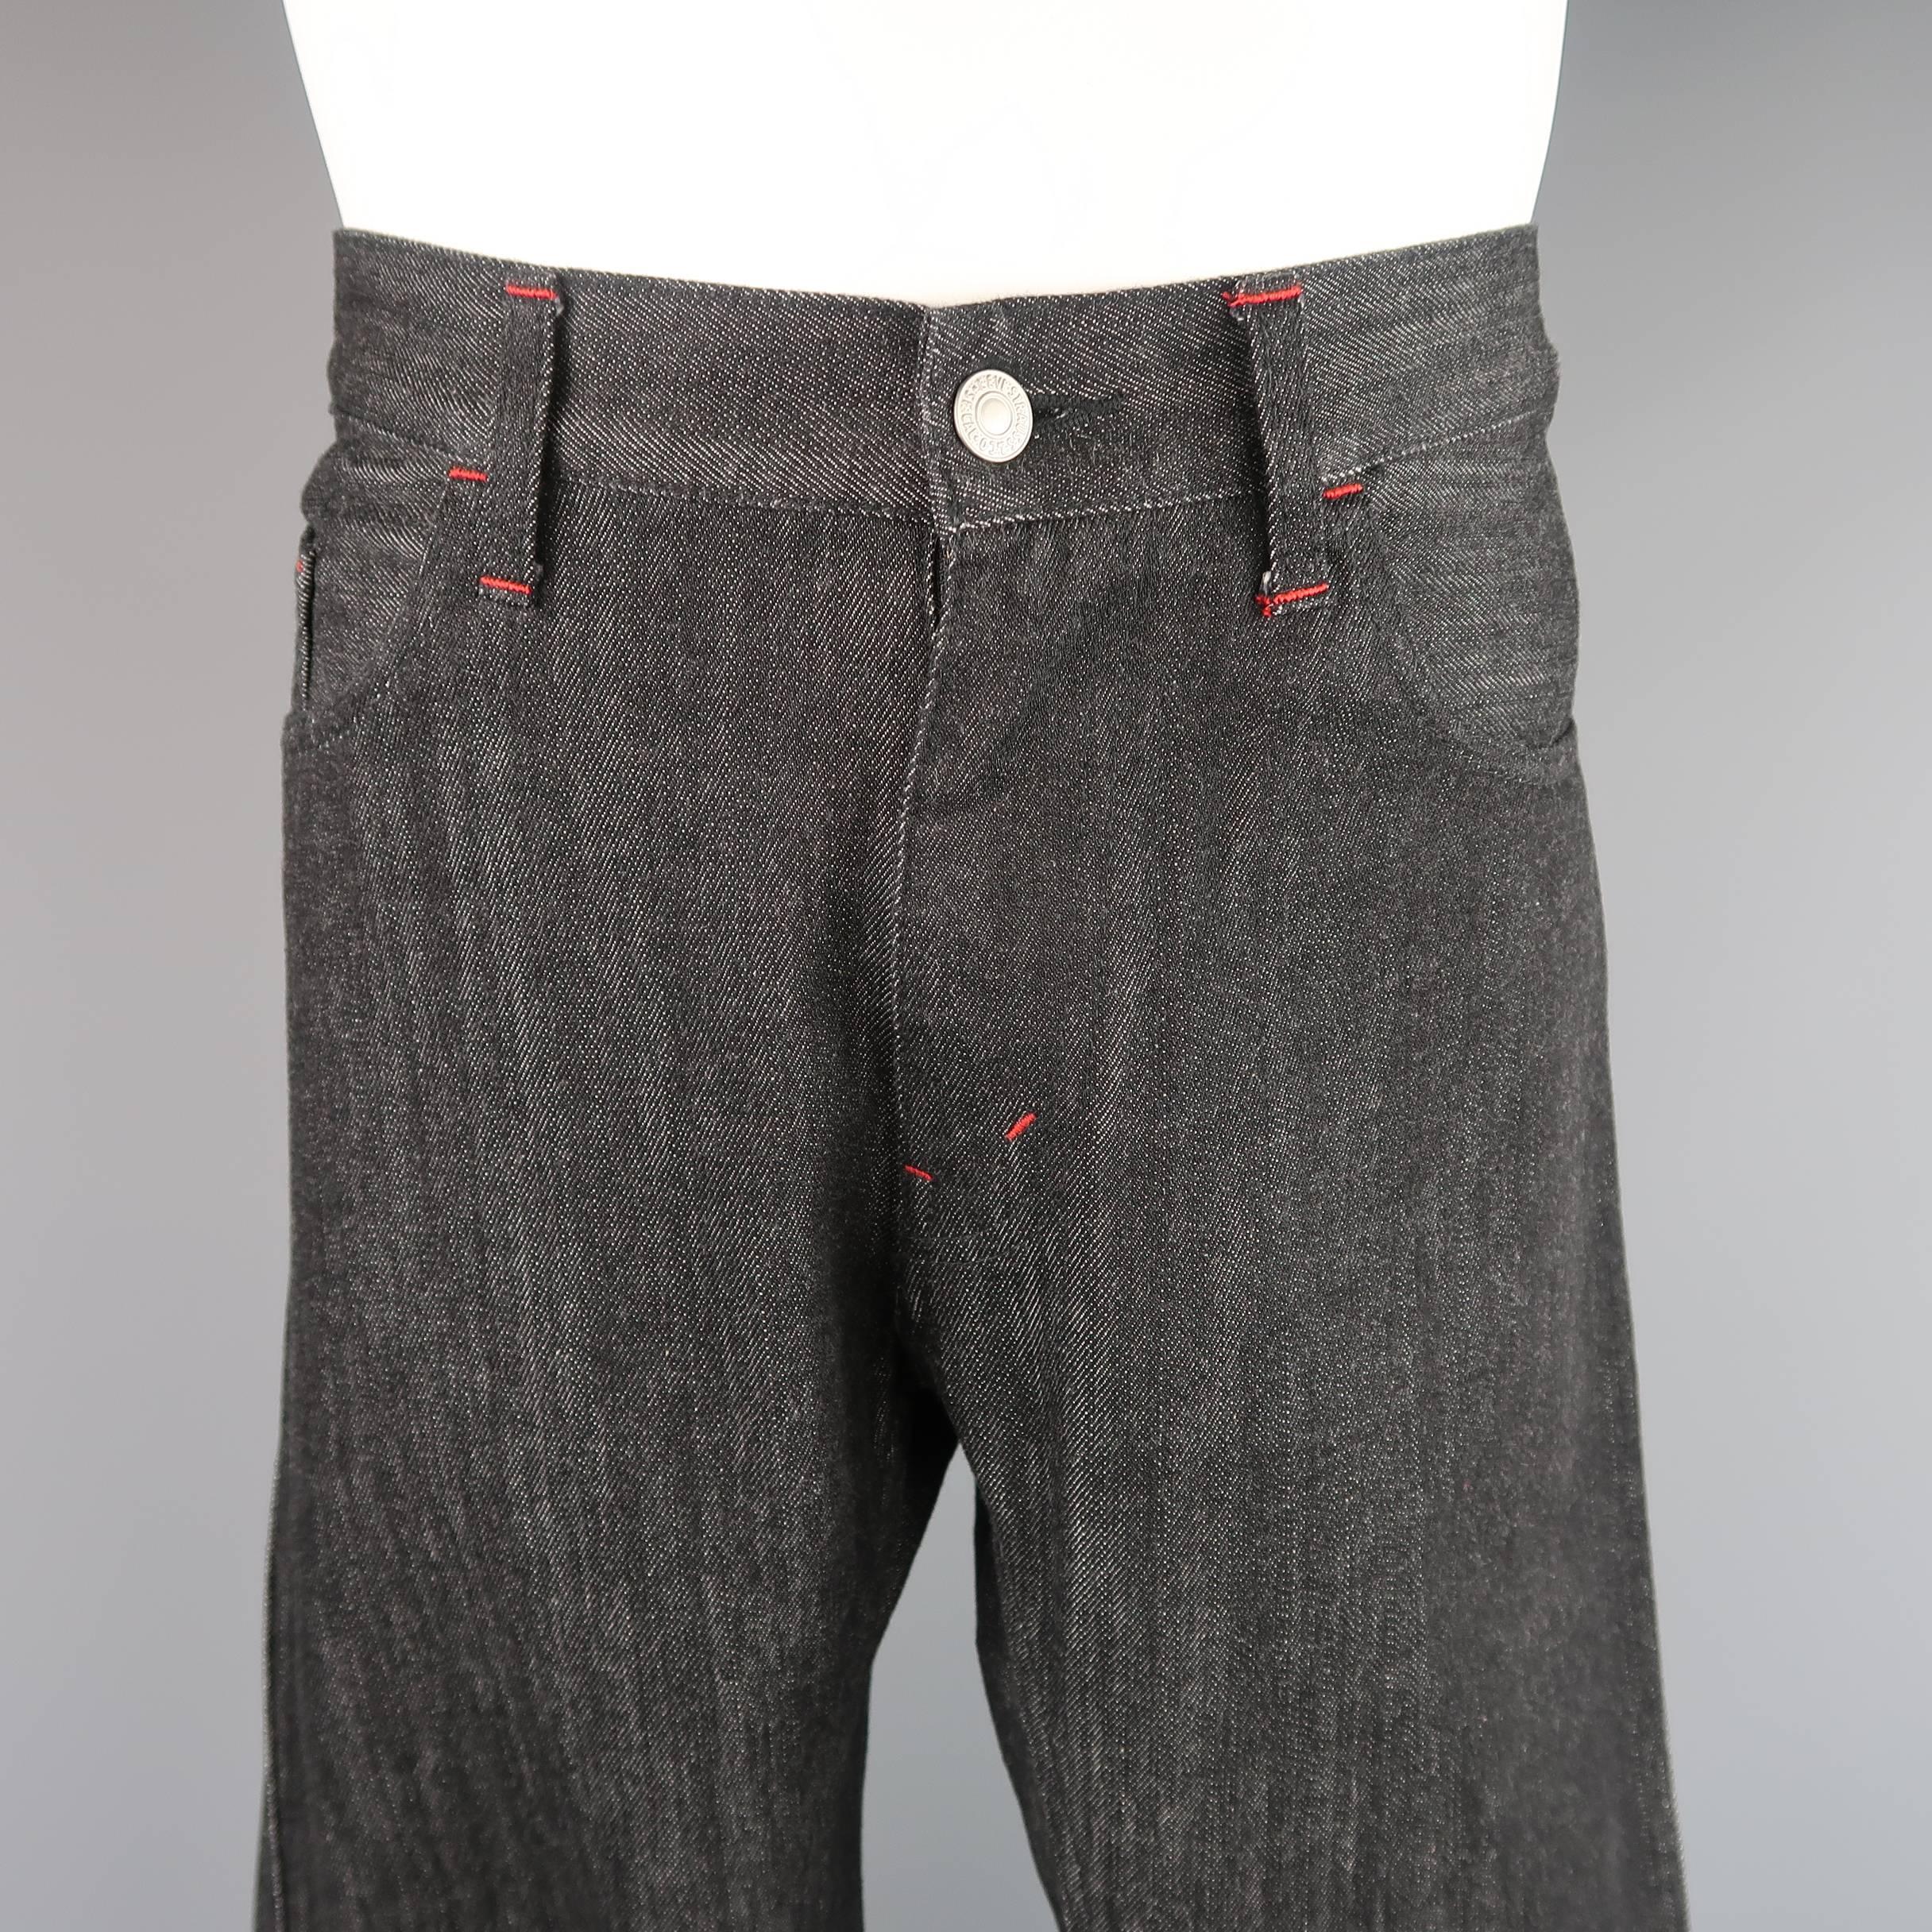 JUNYA WATANABE X LEVI'S jeans come in black raw denim and feature red contrast stitching, knee seams, and darted back seam. Made in Japan.
 
Excellent Pre-Owned Condition.
Marked: M (AD 2010)
 
Measurements:
 
Waist: 37 in.
Rise: 10 in.
Inseam: 31